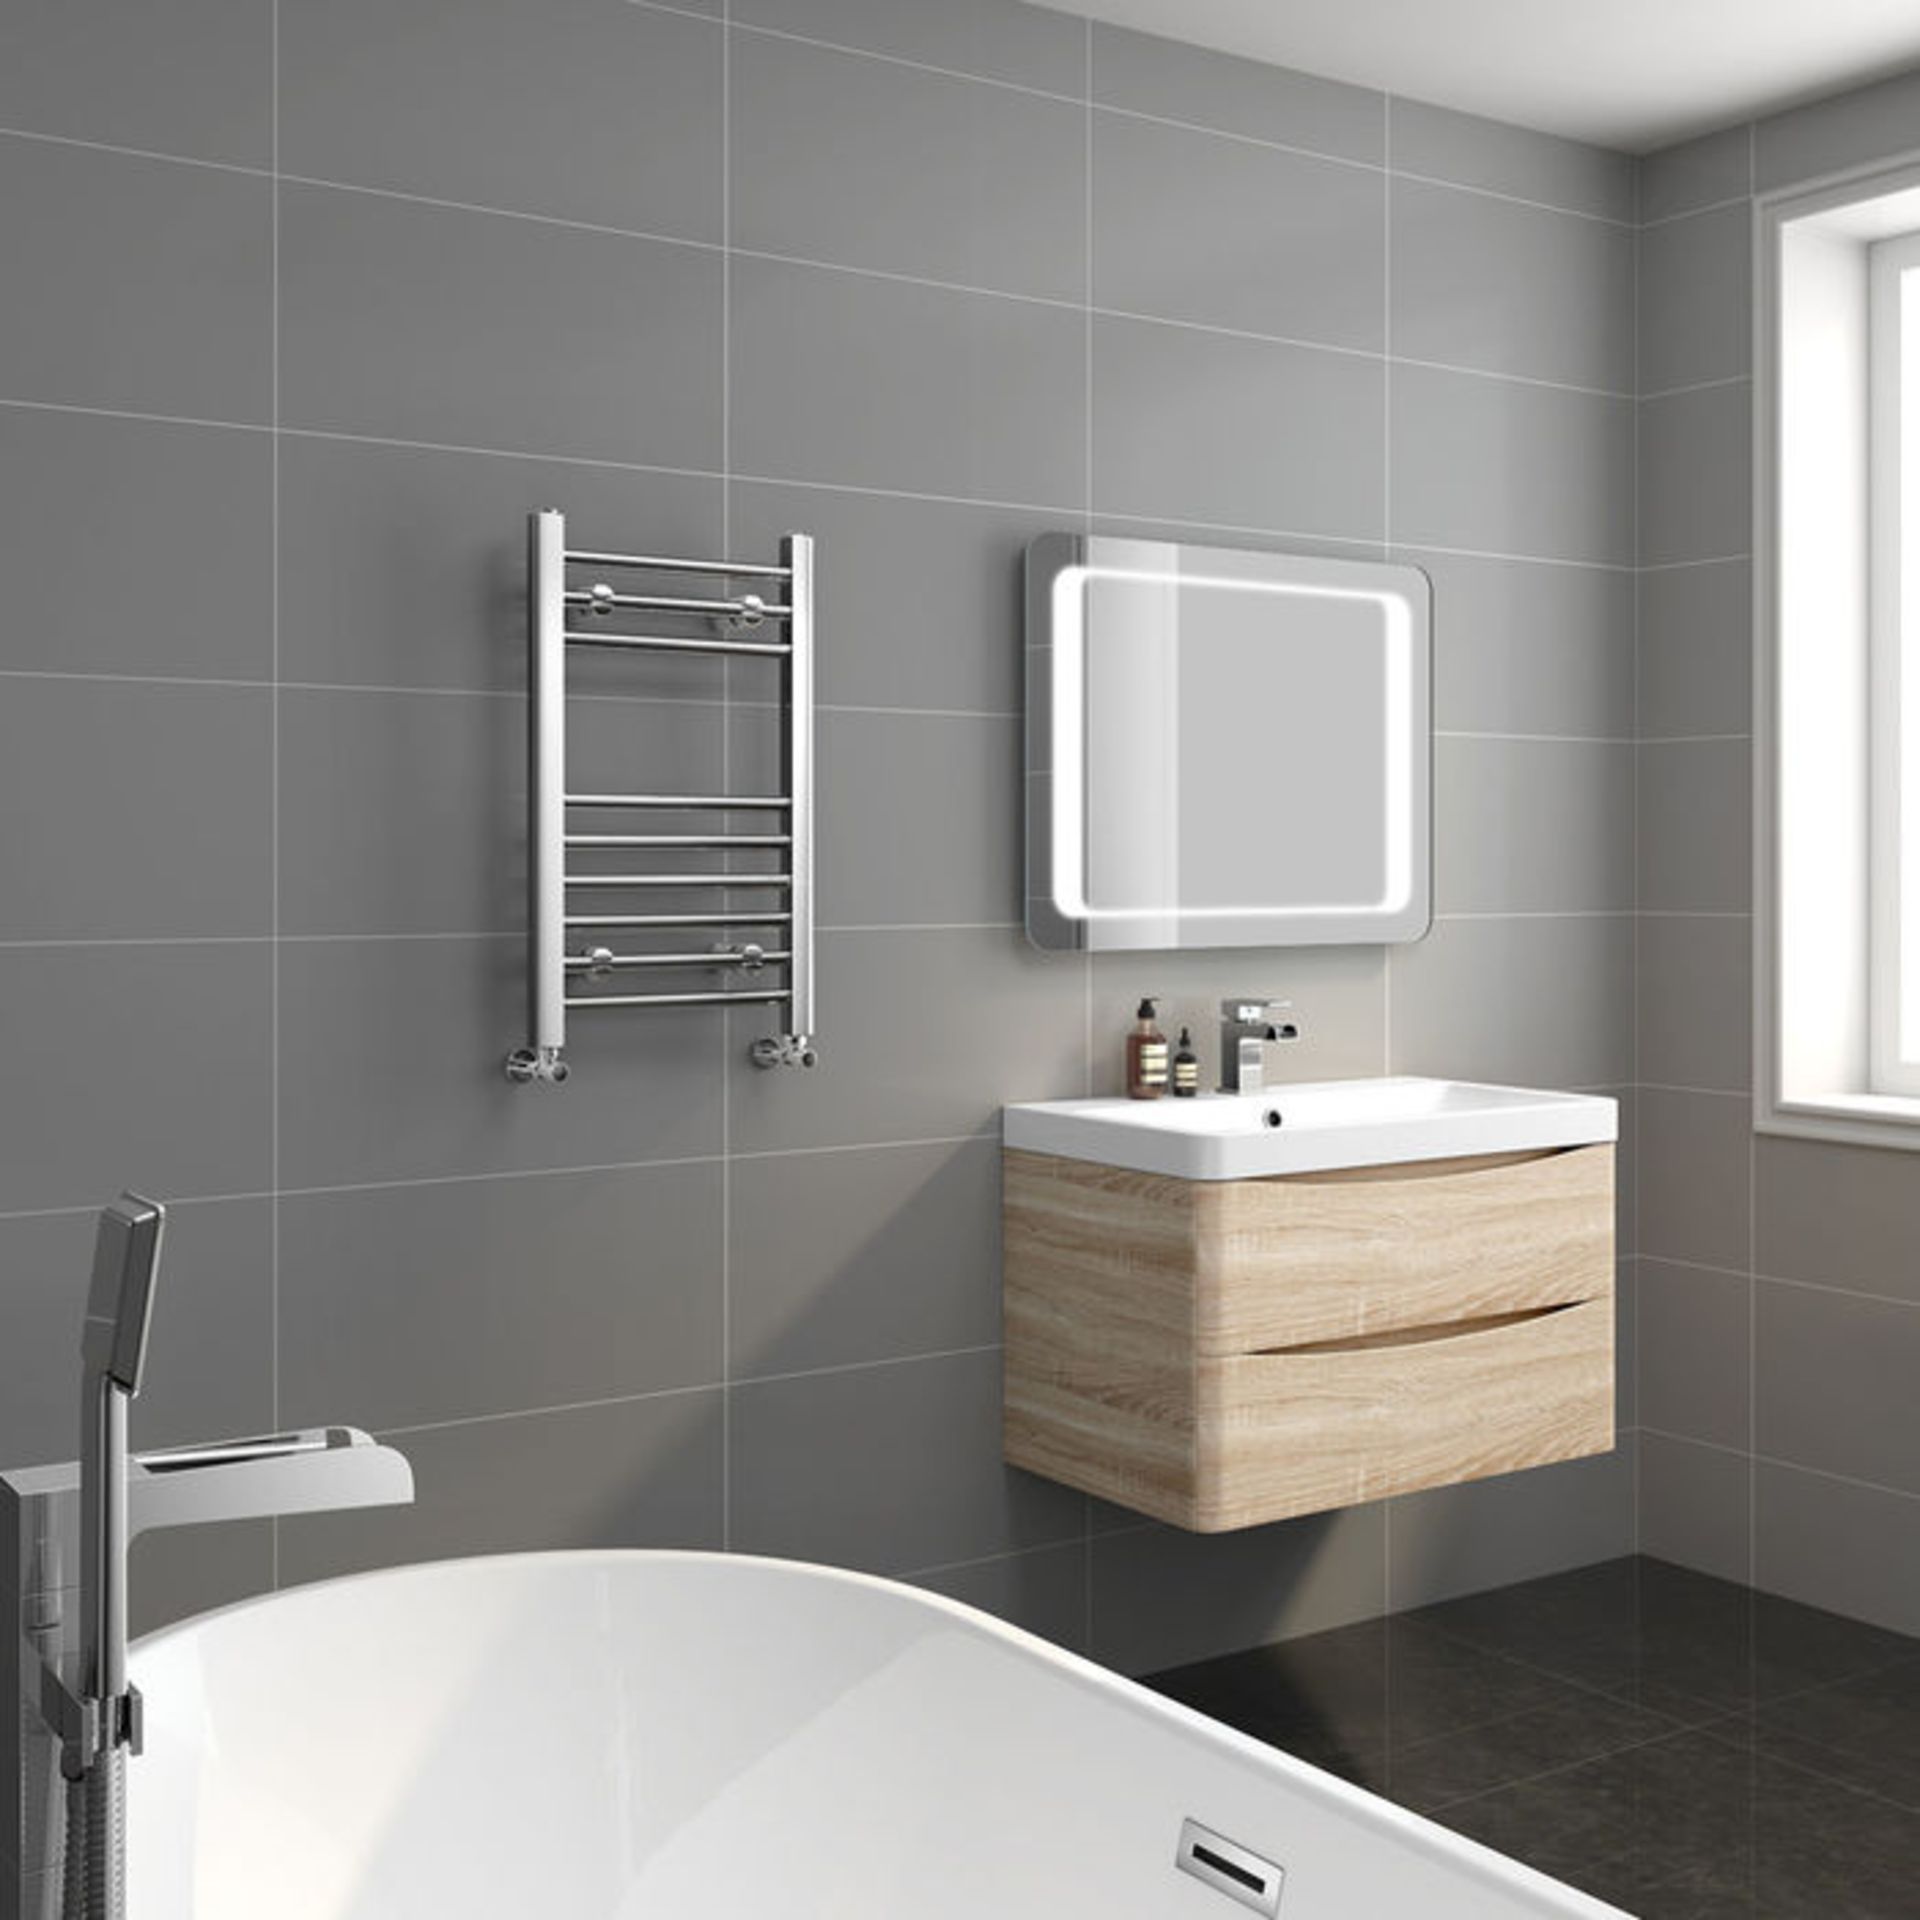 (P114) 650x400mm - Basic 20mm Tubes - Chrome Heated Straight Rail Ladder Towel Radiator. Low carbon - Image 2 of 4